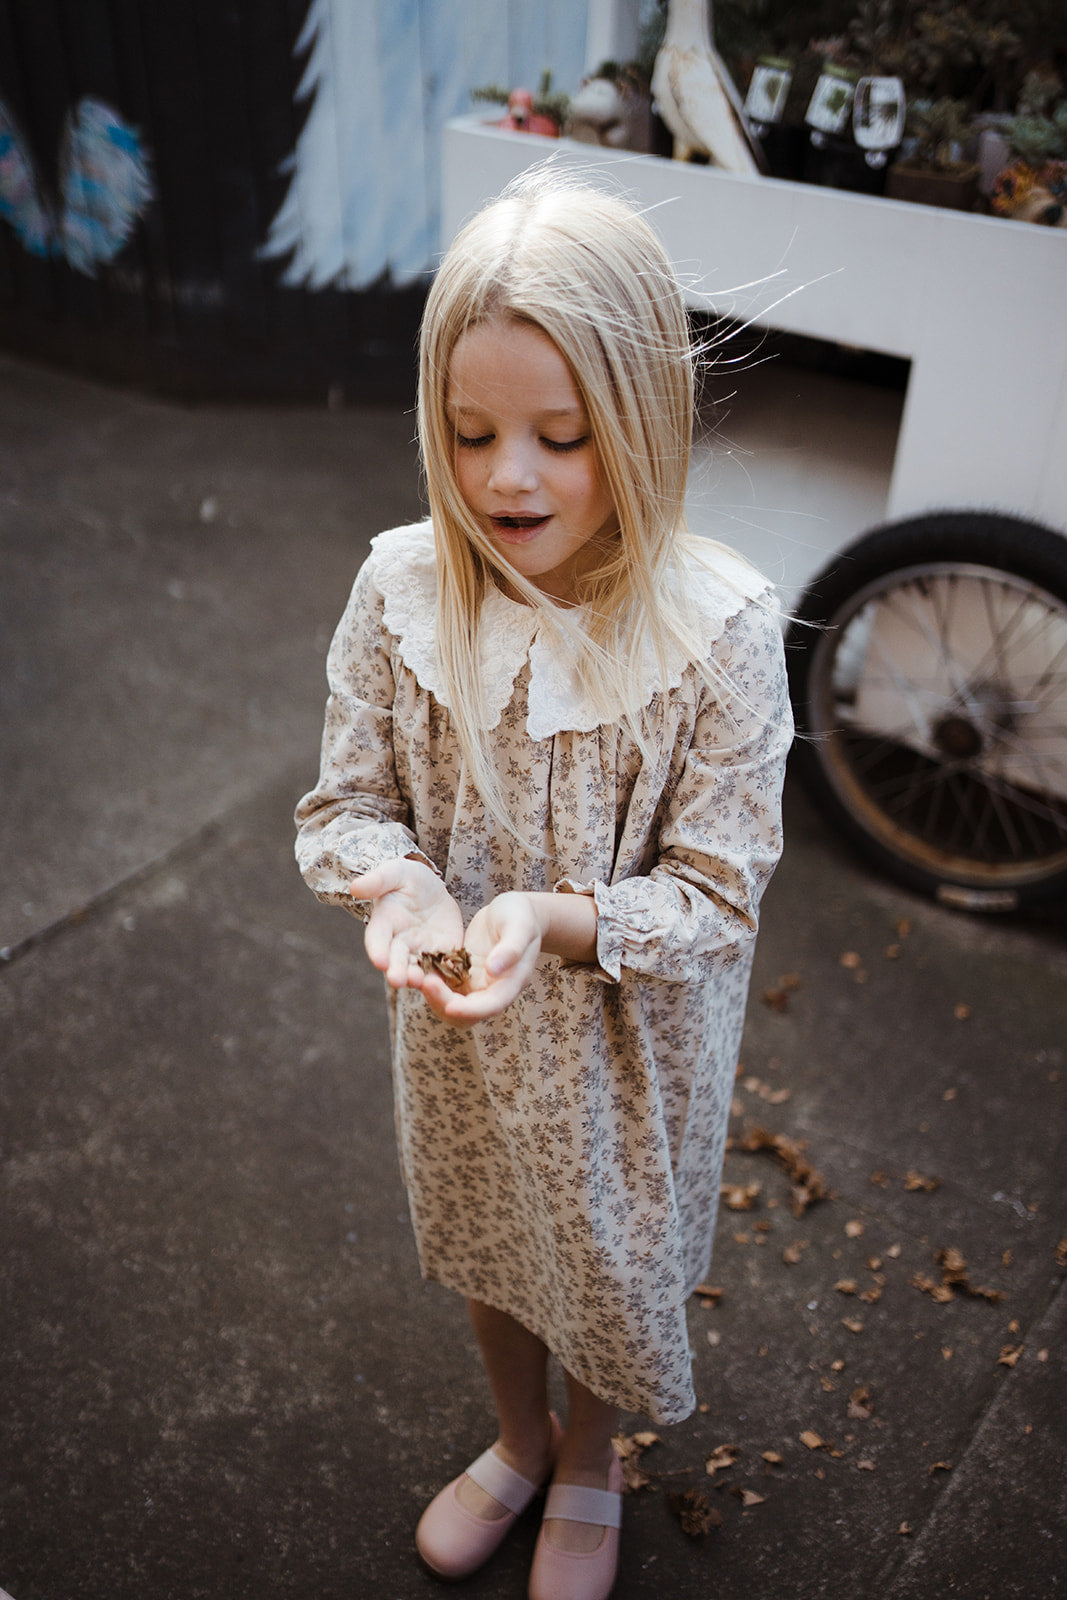 Girls Cotton Lace Collar Floral Long Sleeves Dress